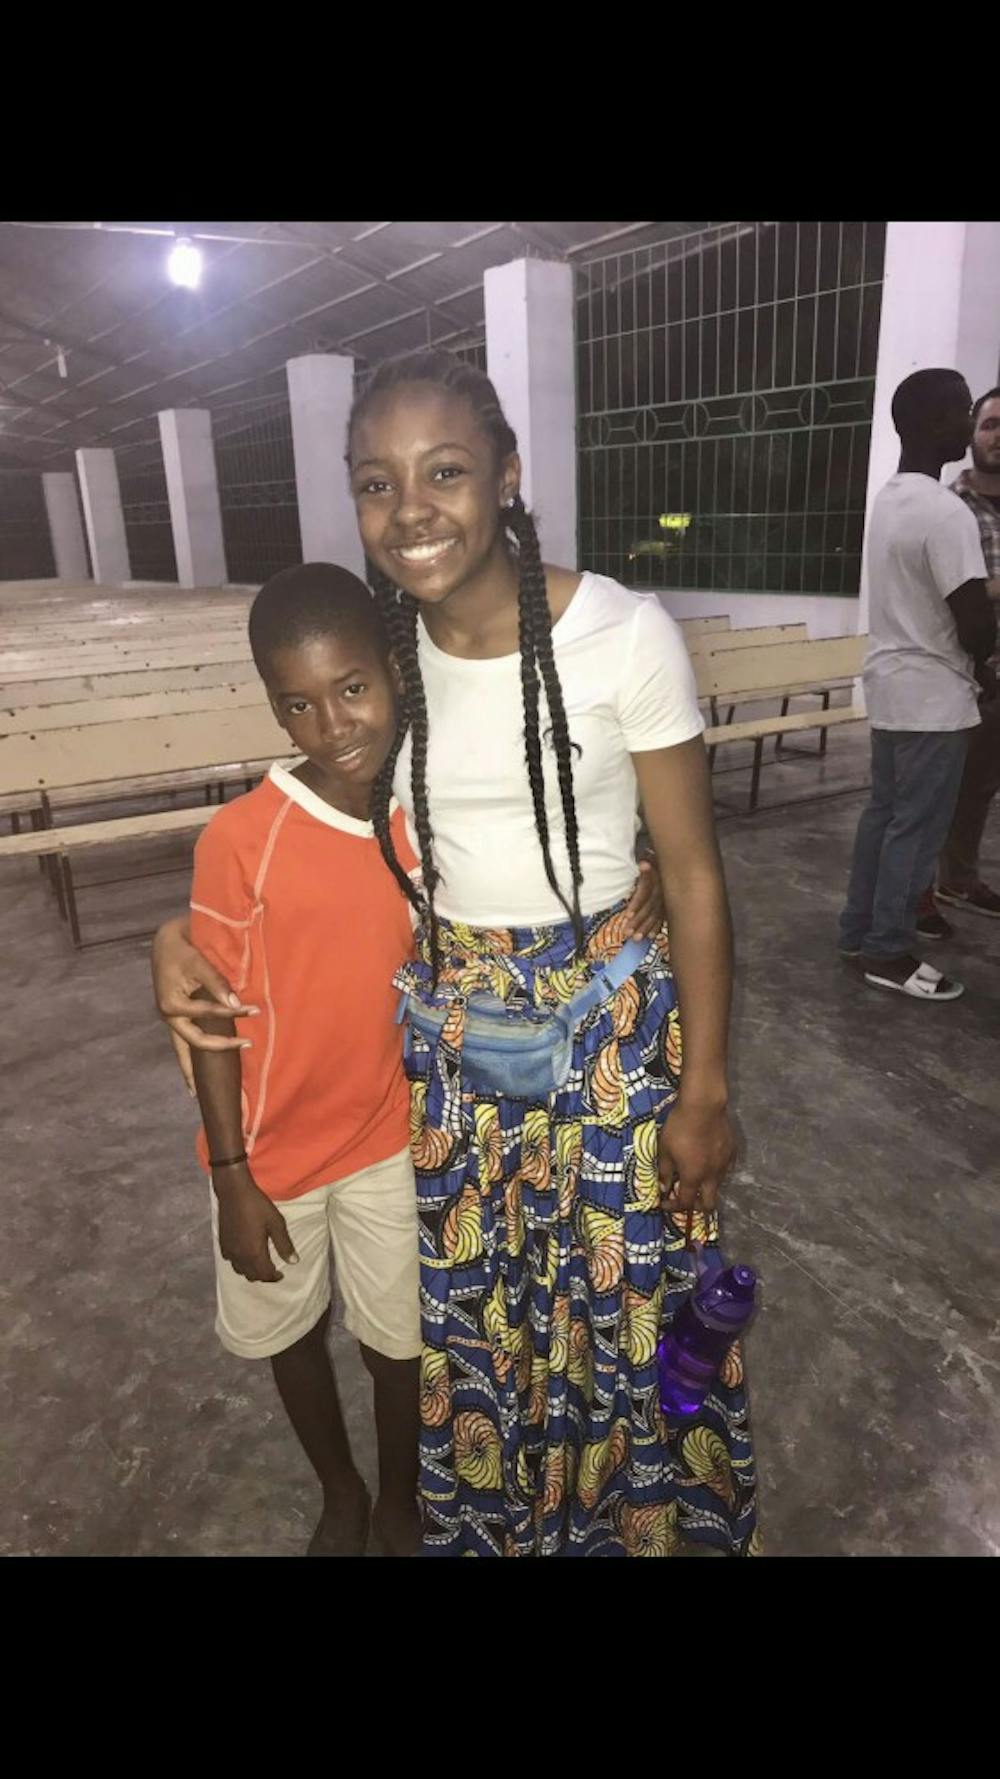 <p>Sade’ Ried and village boy attending Mission of Hope’s Church.&nbsp;</p><p>Photo Credit: Aaron Donaghy Avondale High School teacher </p>